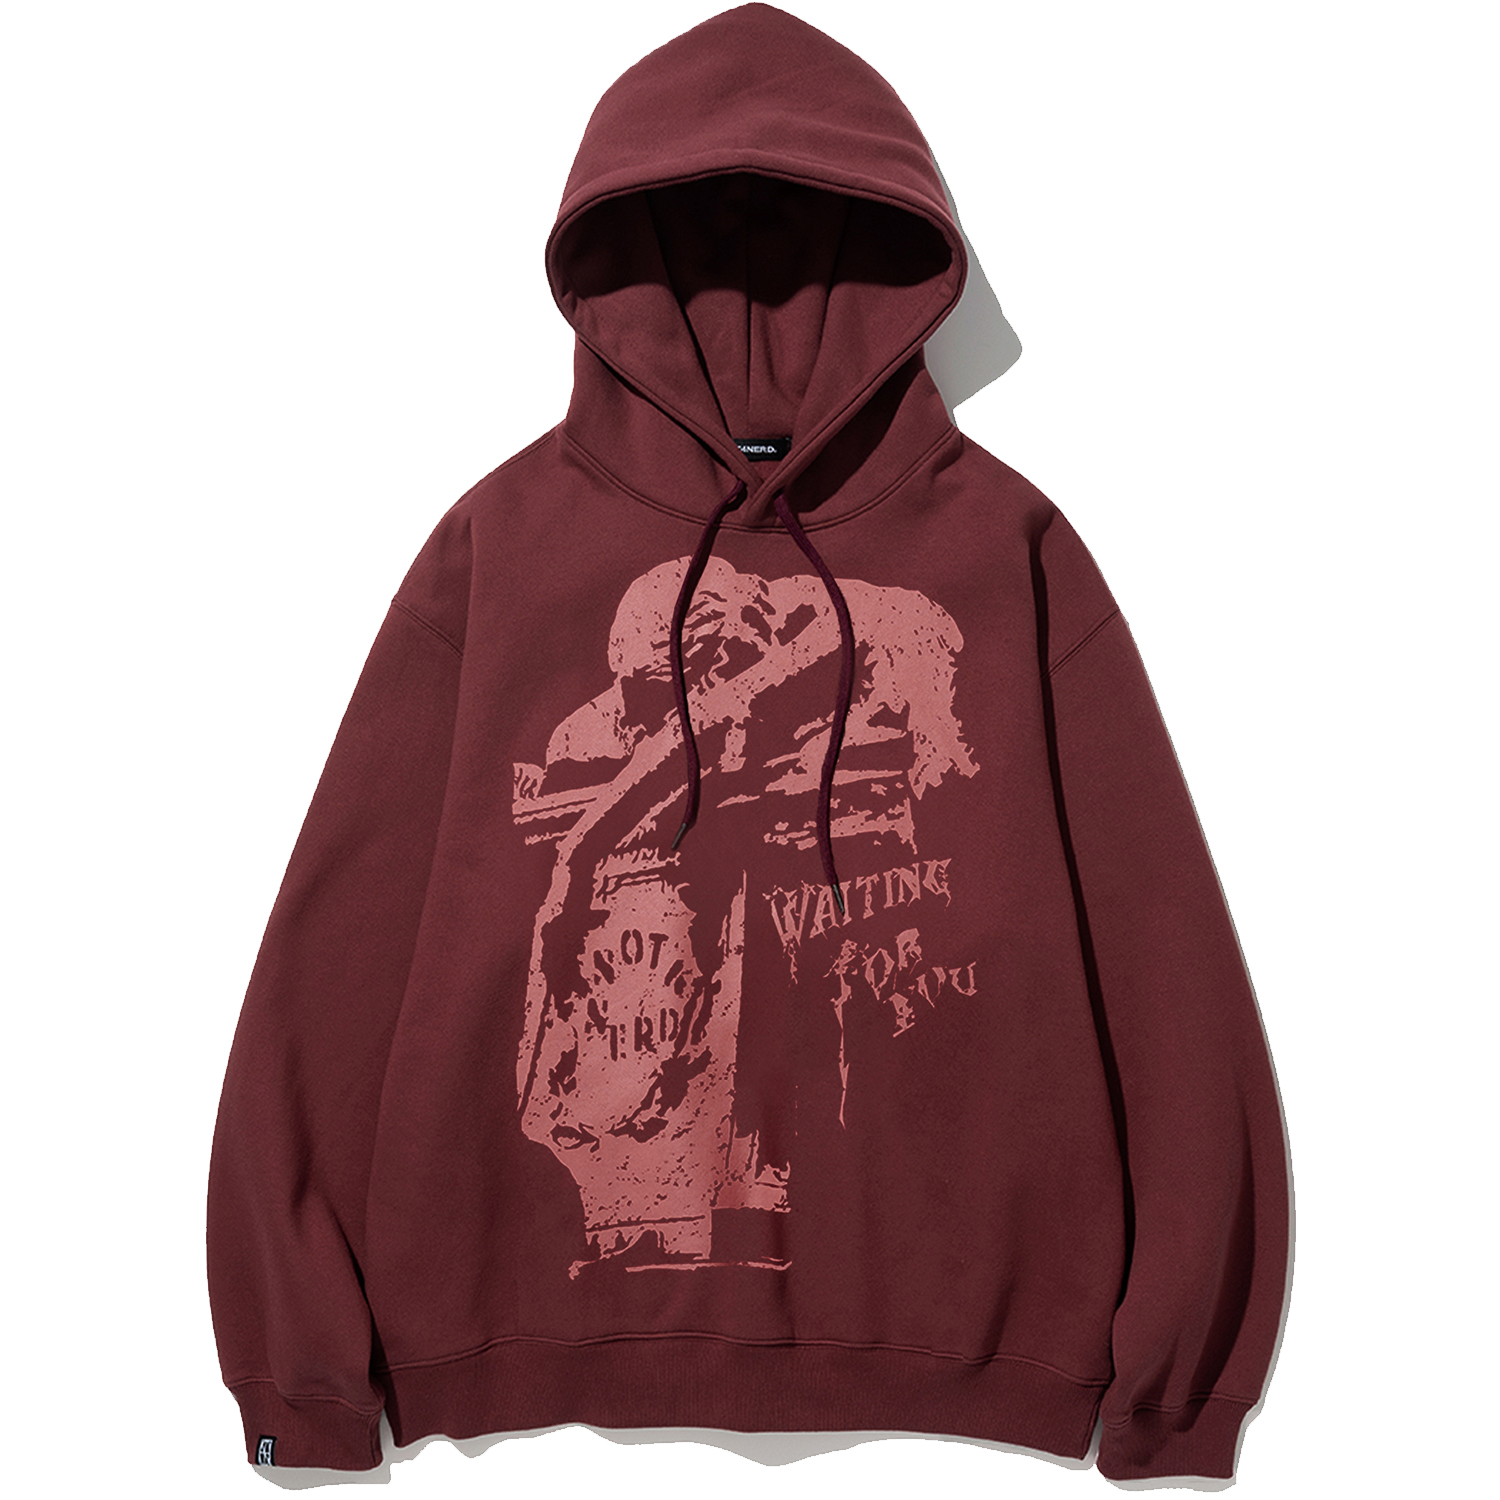 Waiting For You Pullover Hood - Wine,NOT4NERD